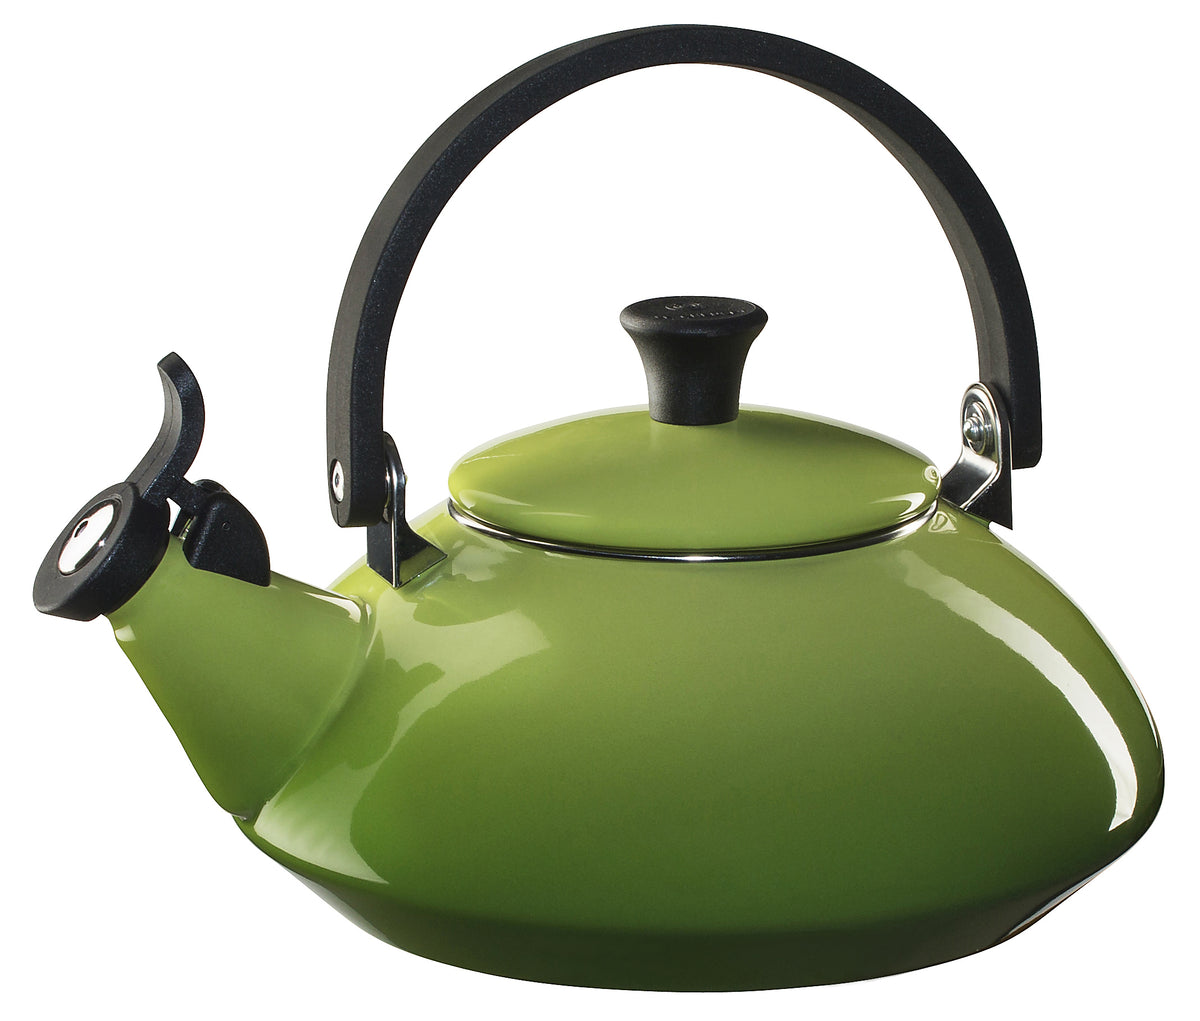 buy tea kettles at cheap rate in bulk. wholesale & retail kitchen equipments & tools store.